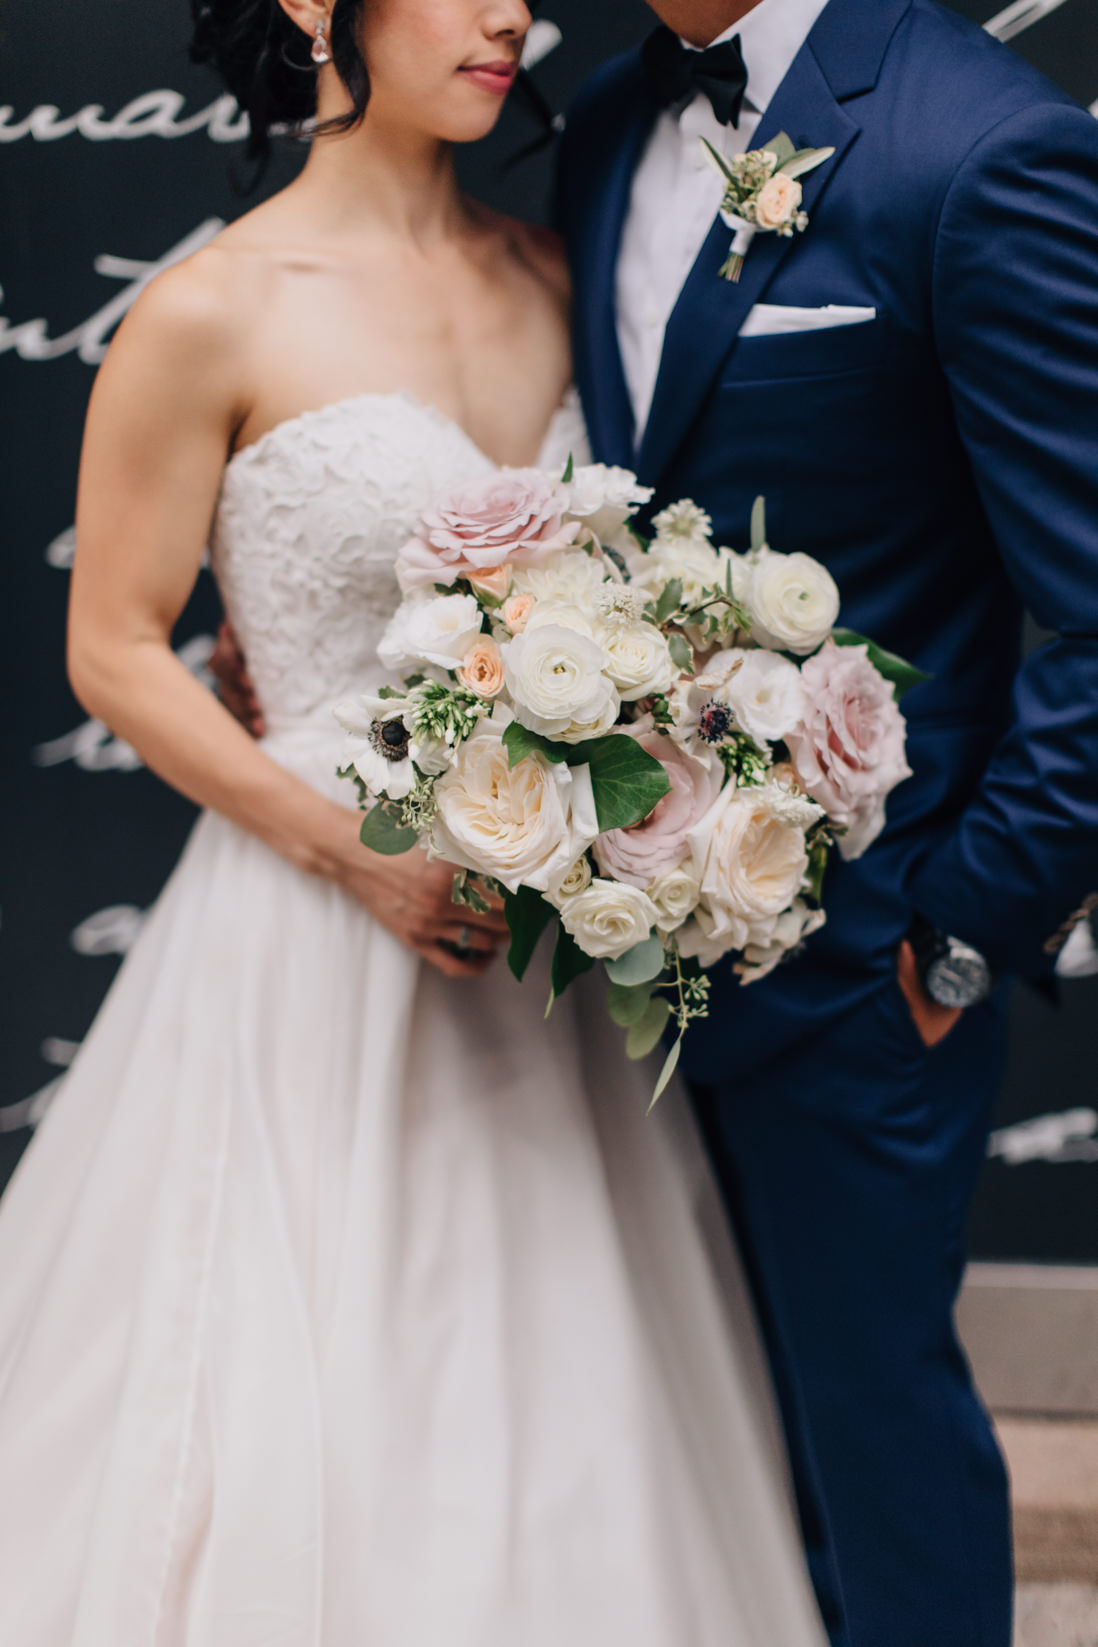 Floral detail blush and cream wedding bouquet and boutonniere Flower597 Toronto Wedding Photographer Eighty FifthStreet Photography